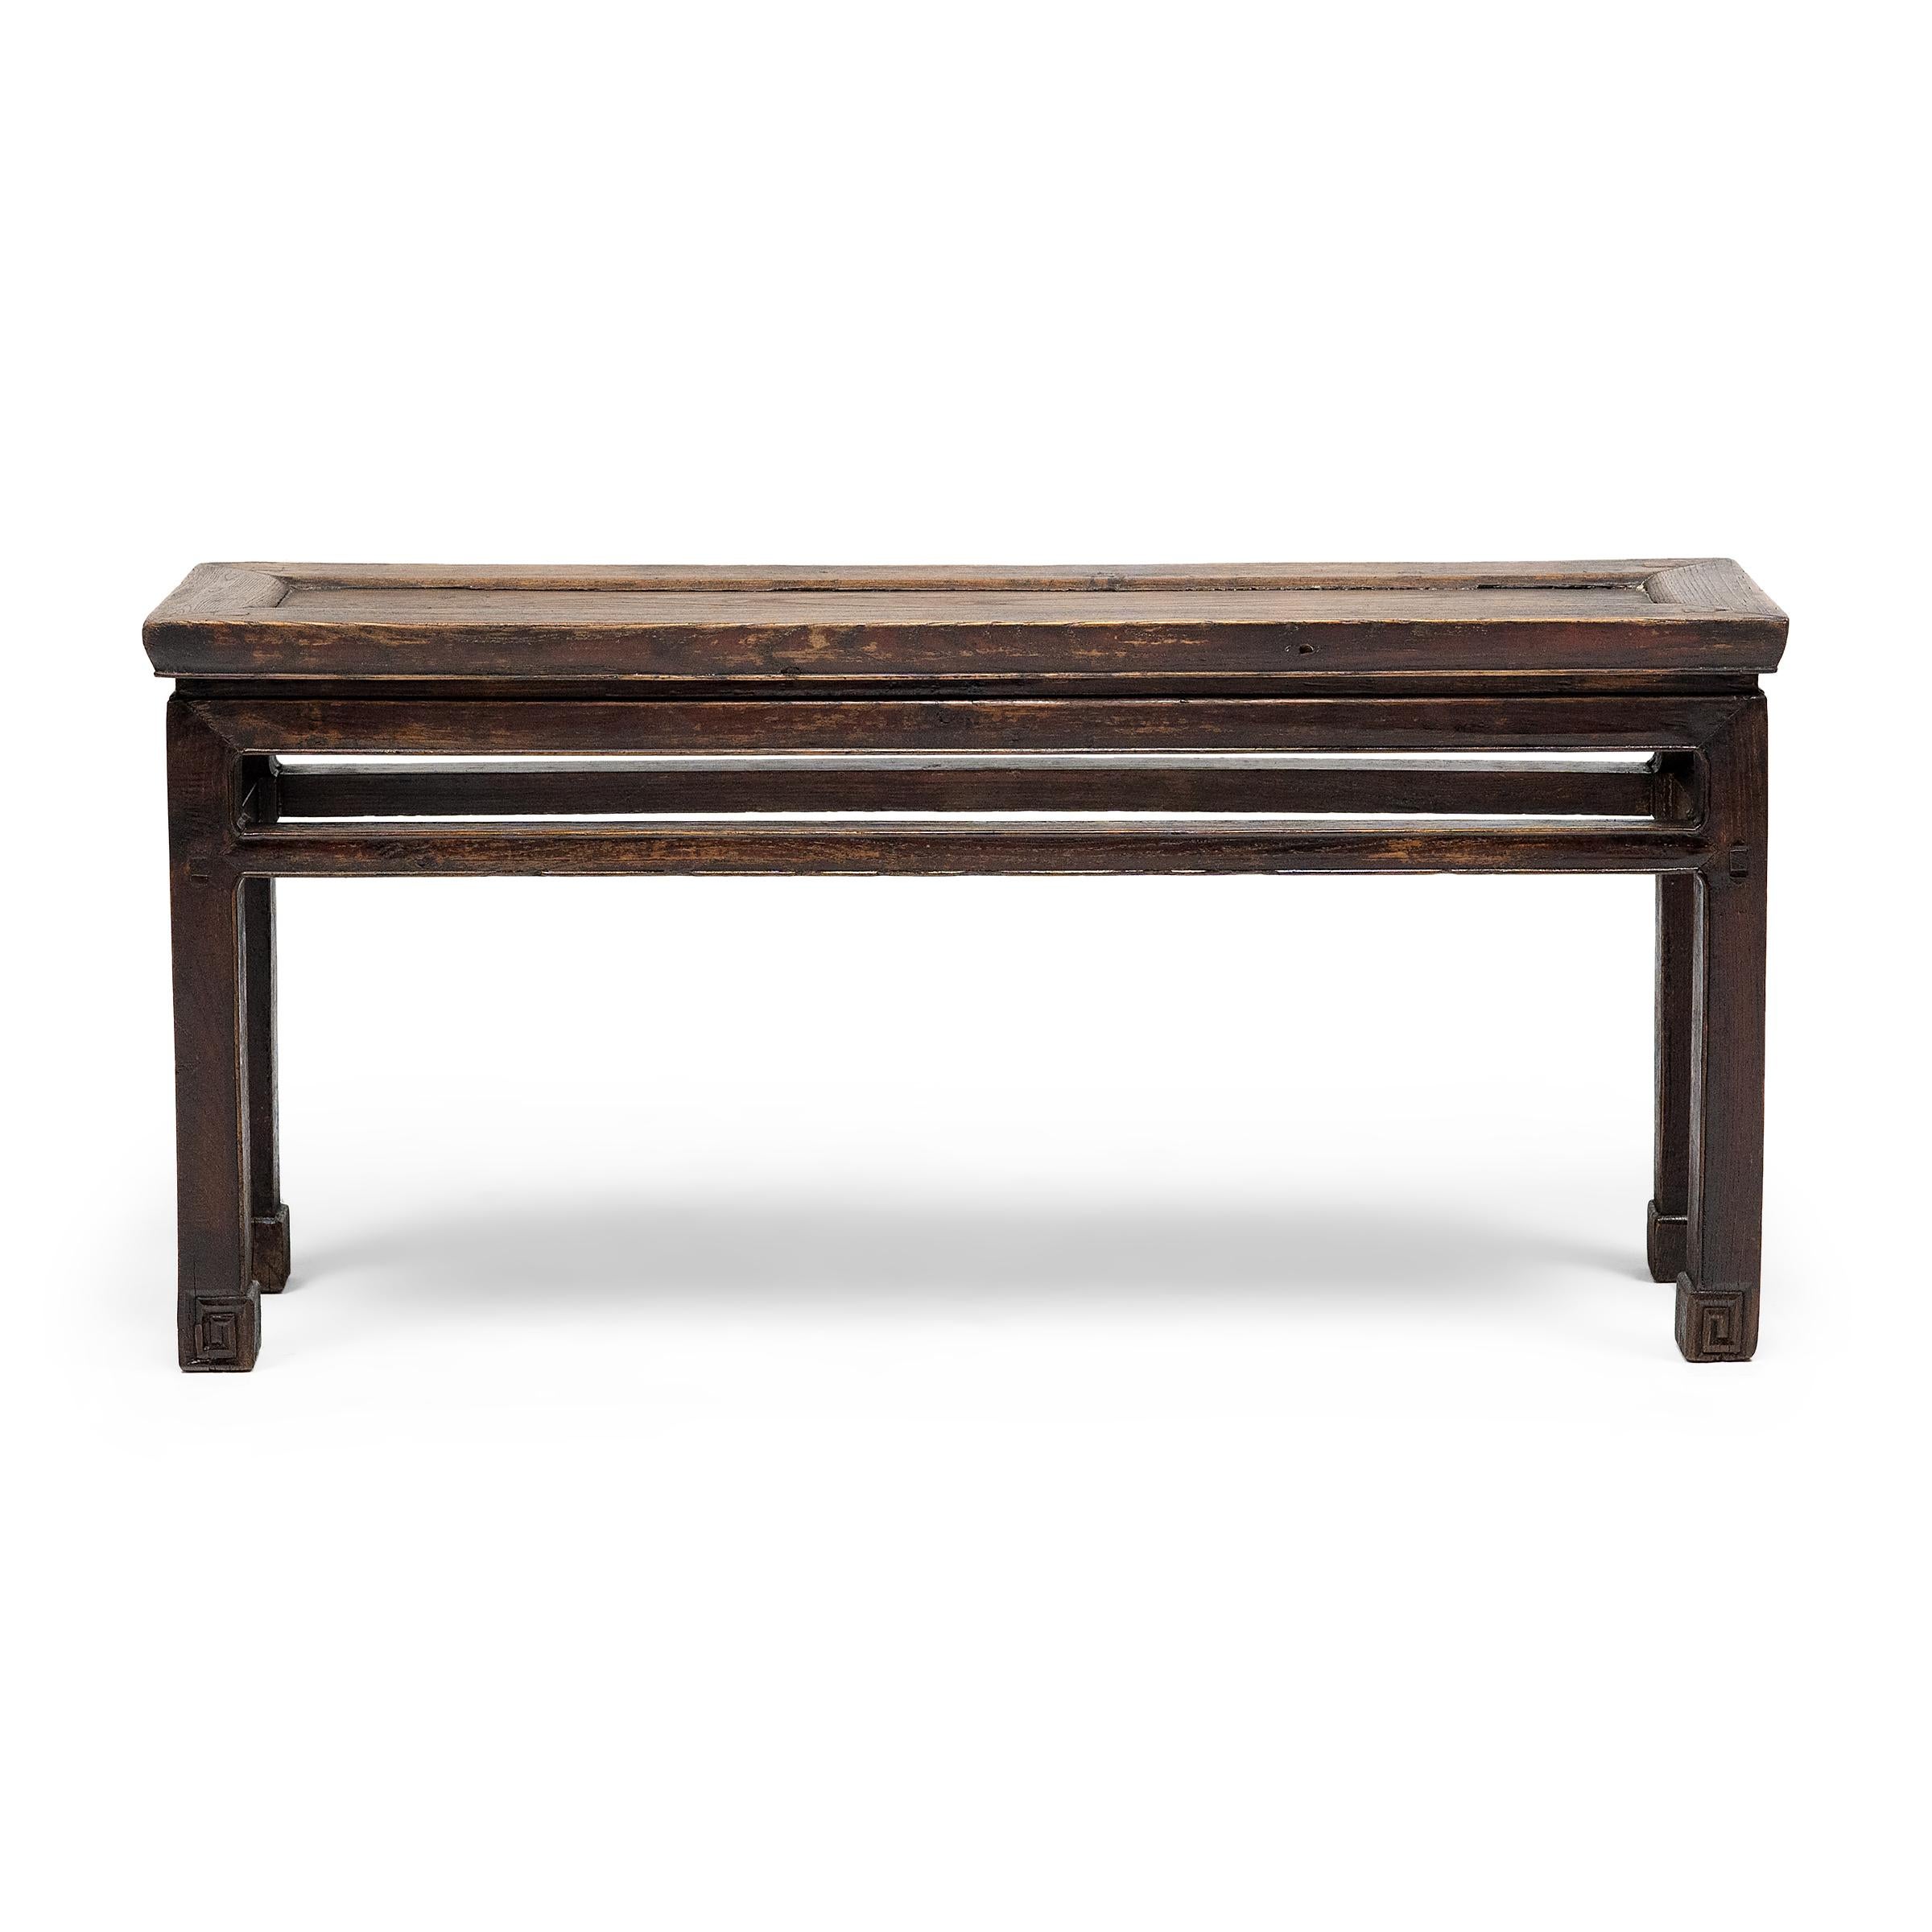 This early 19th-century bench would have originally resided in the courtyard of a Qing-dynasty home to provide much-needed outdoor seating on hot summer days. The bench is designed in a classic Ming style, with a floating panel top, waisted apron,